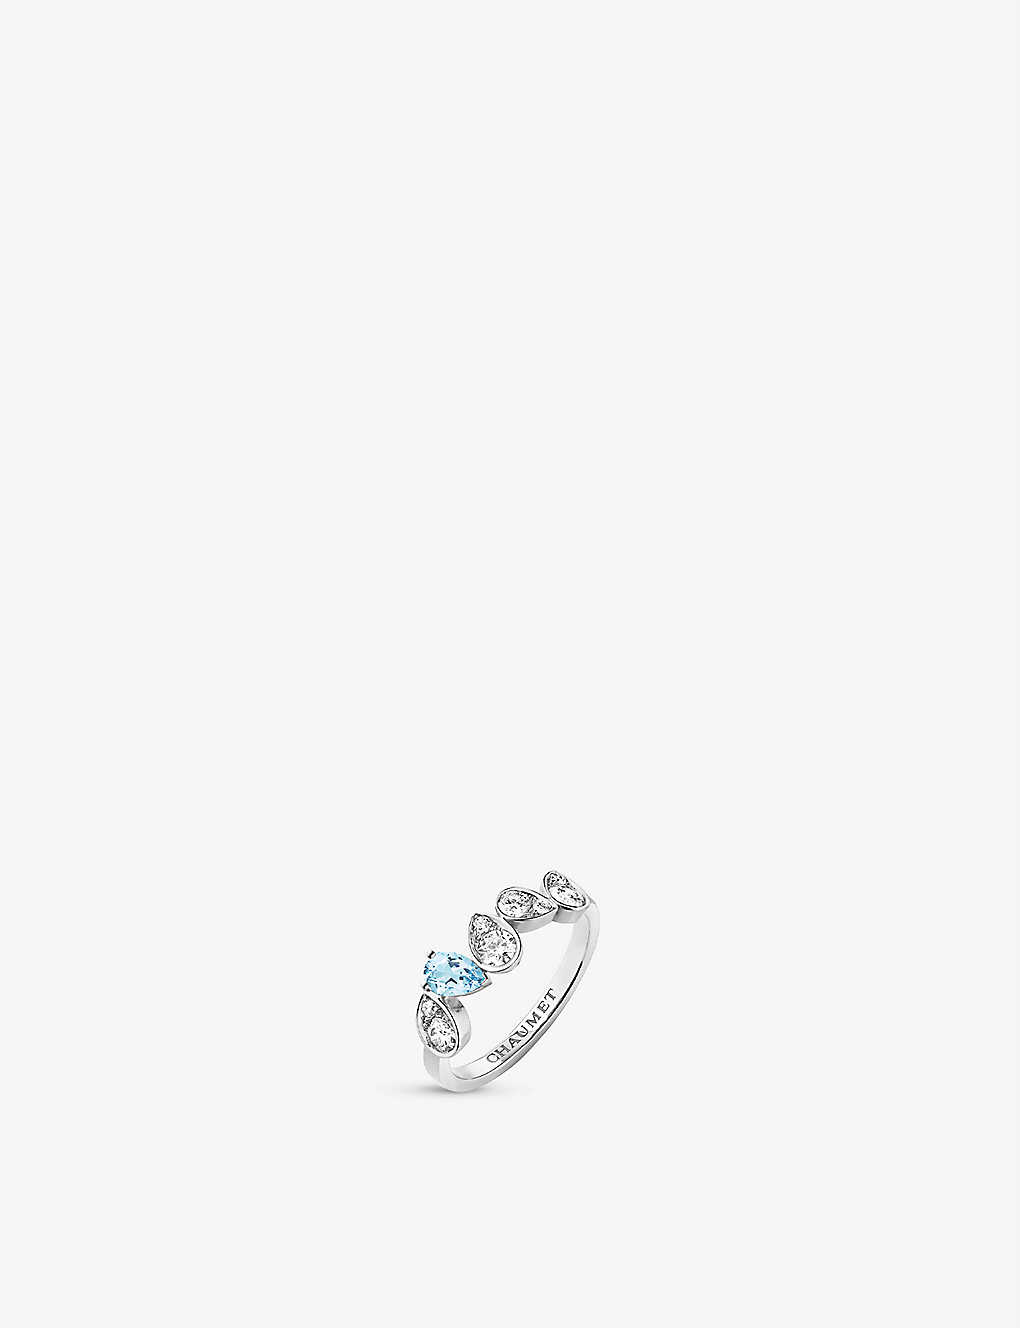 Chaumet Womens White Gold Joséphine Ronde D'aigrettes White-gold, Diamond And Aquamarine Ring